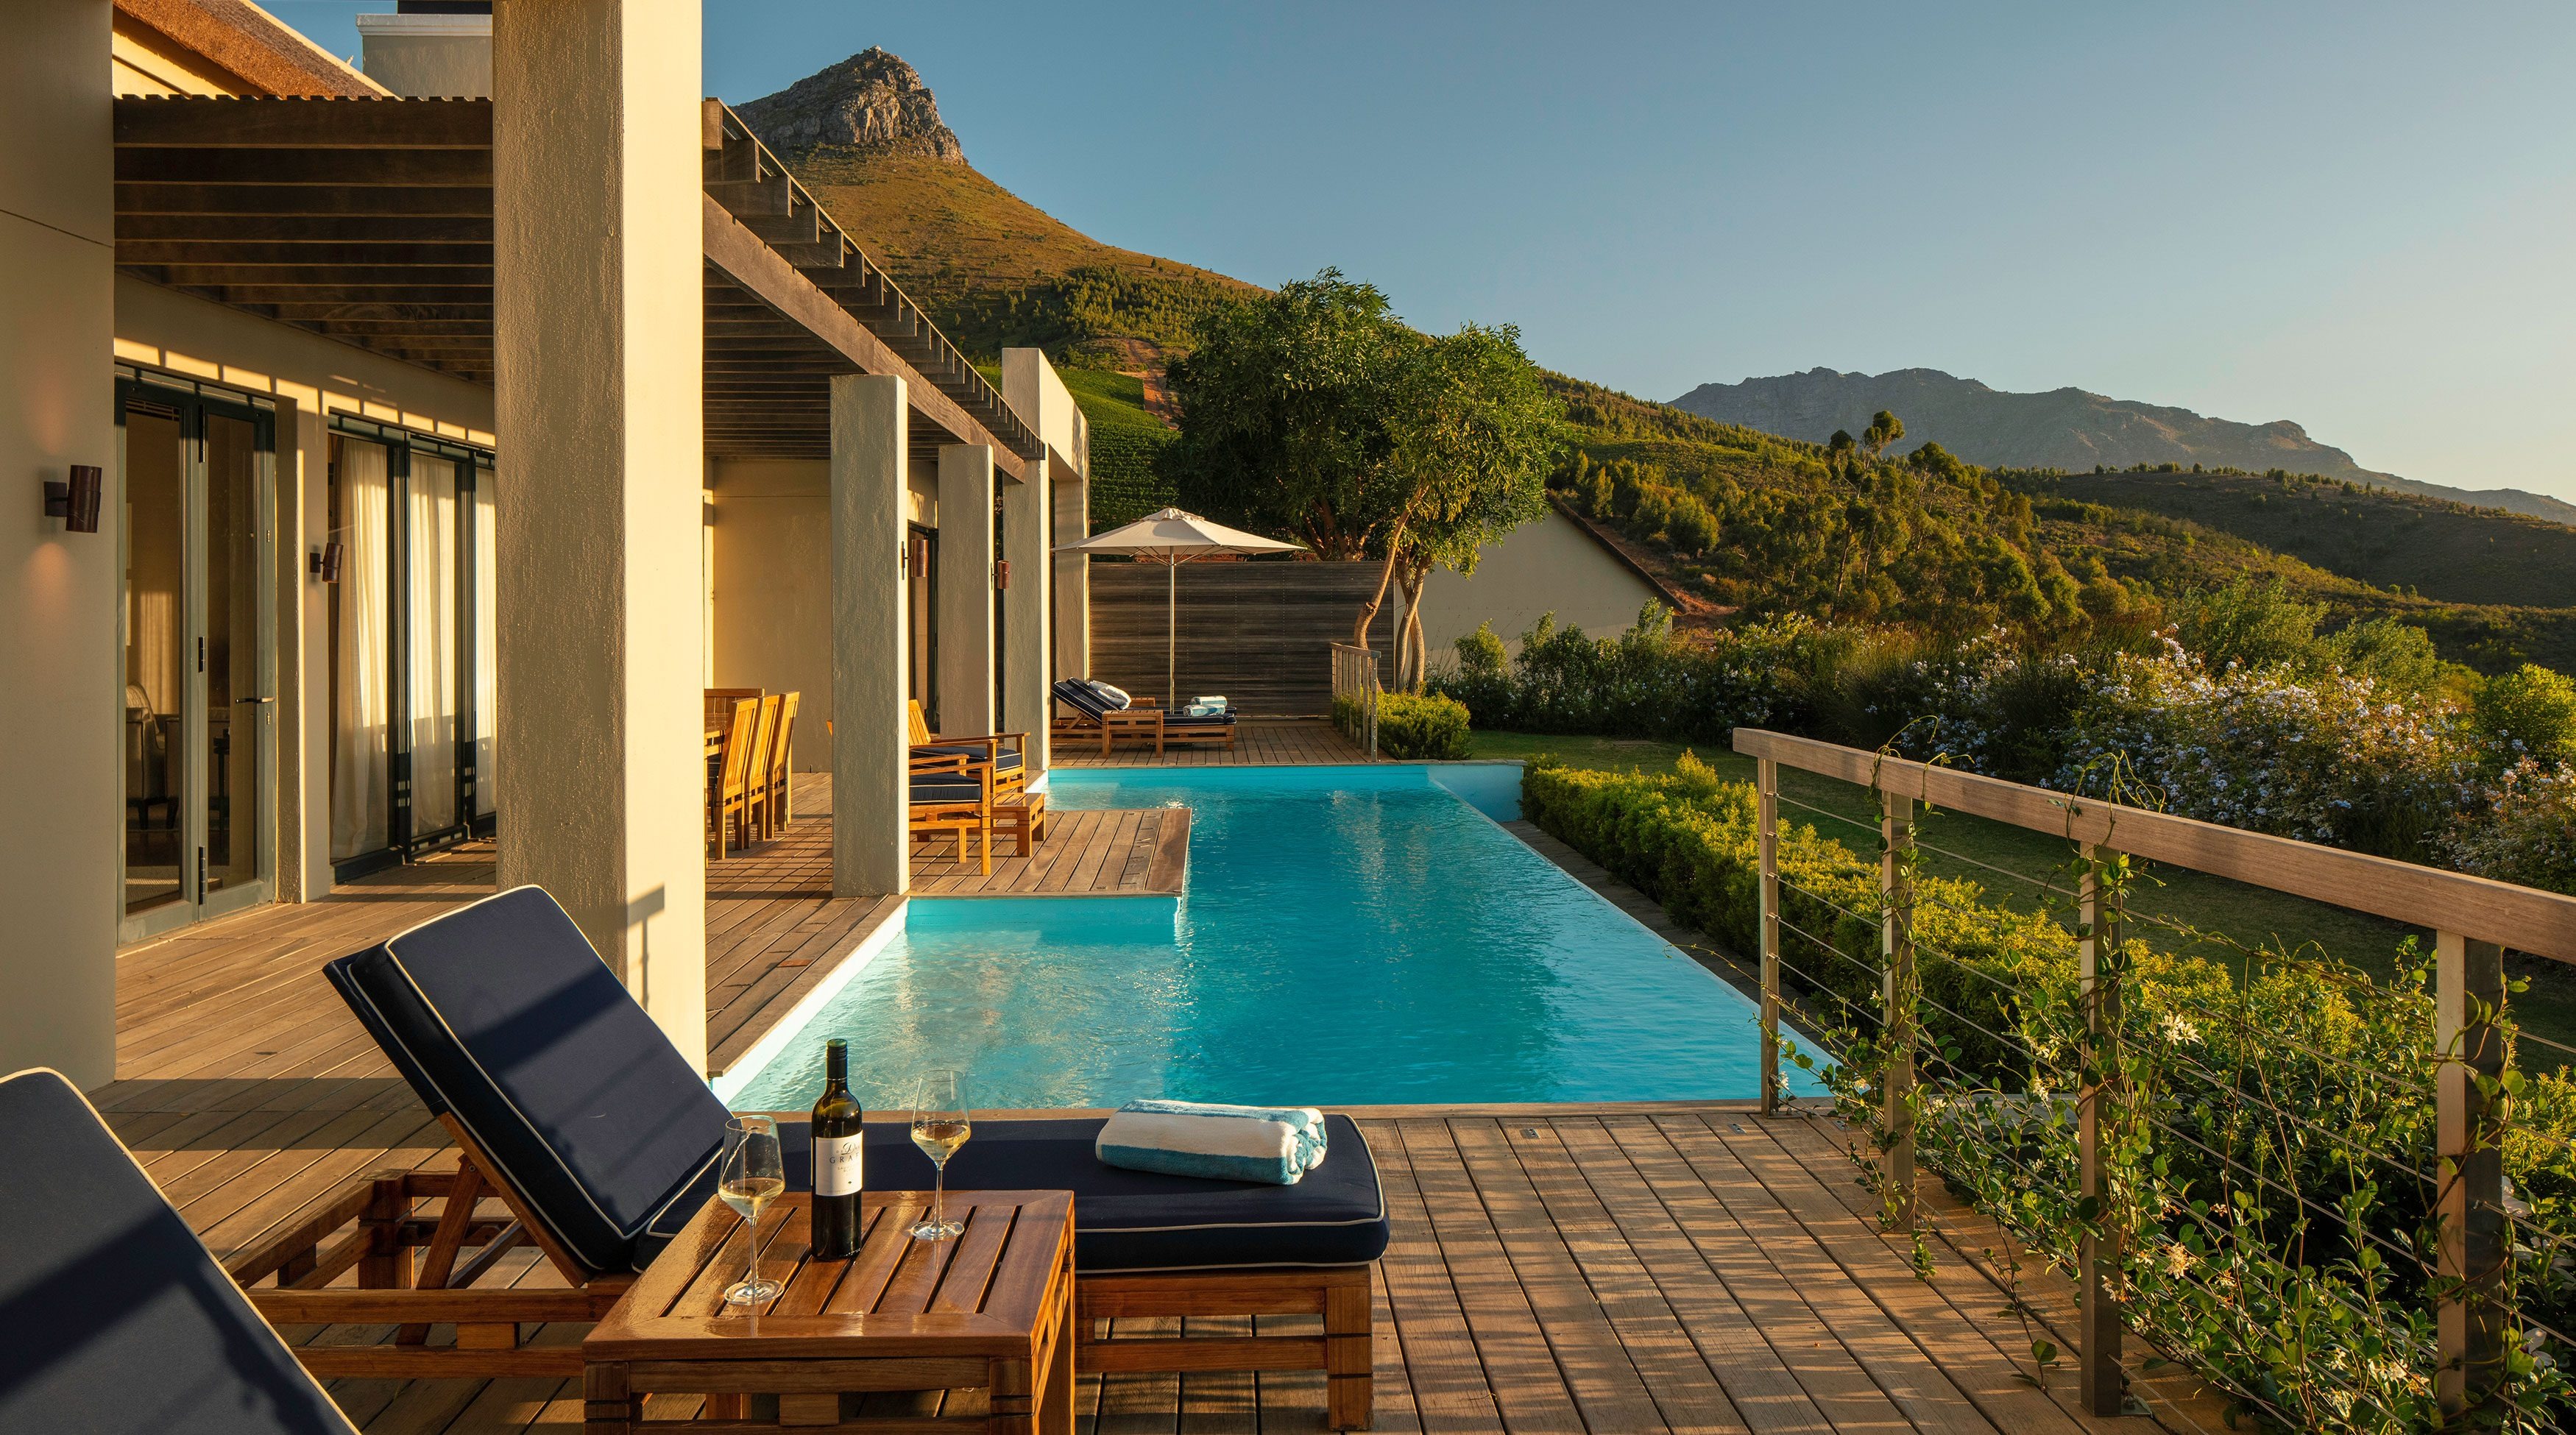 12m-metre-Presidential-Lodge-1-pool-and-terrace-overlooking-mountains-at-Delaire-Graff-Estate-in-Stellenbosch-South-Africa-3500x1950_1624277943754